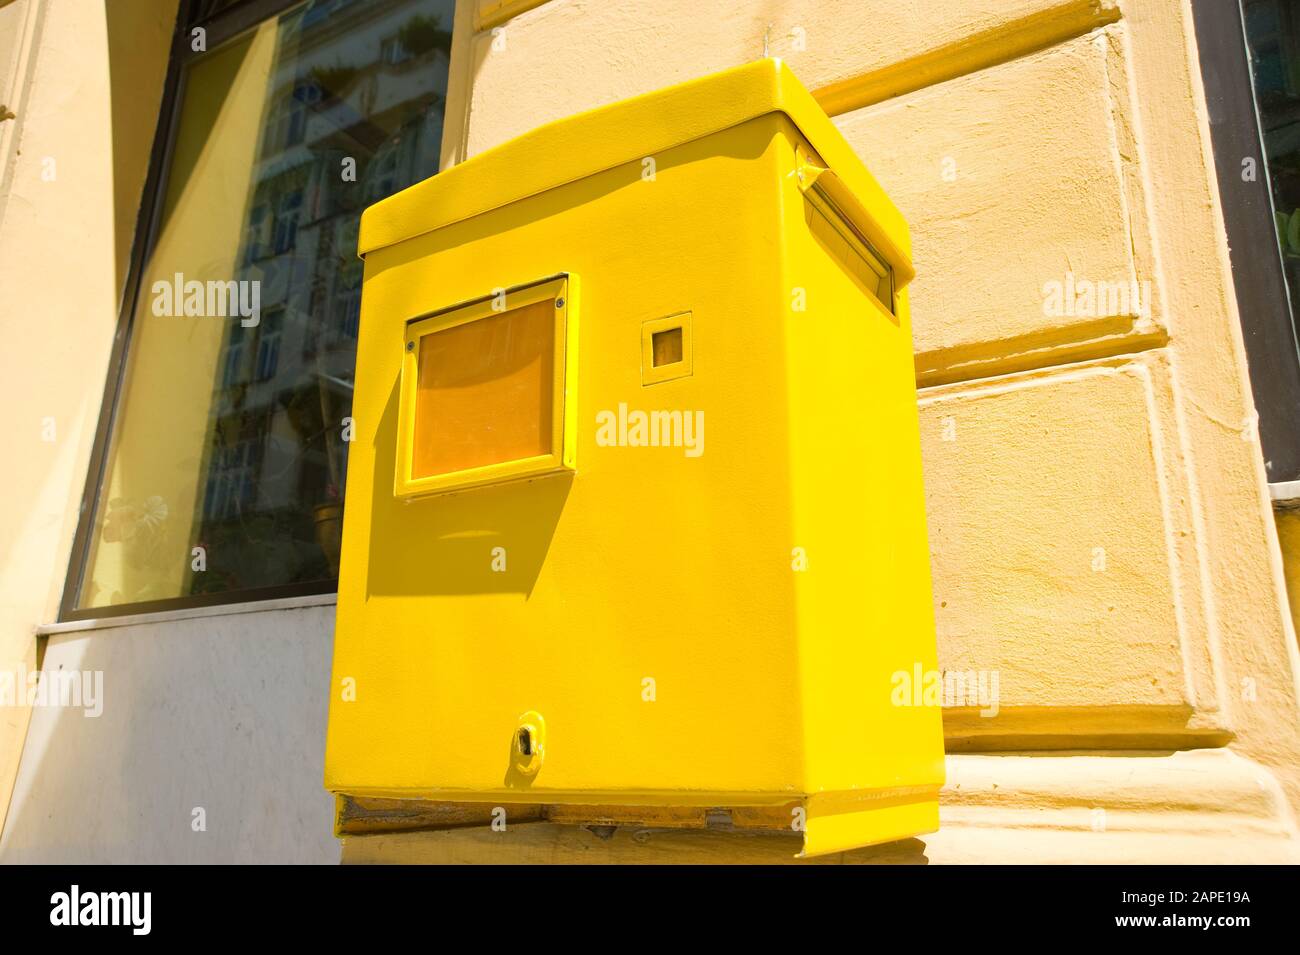 Page 3 - Briefkasten High Resolution Stock Photography and Images - Alamy